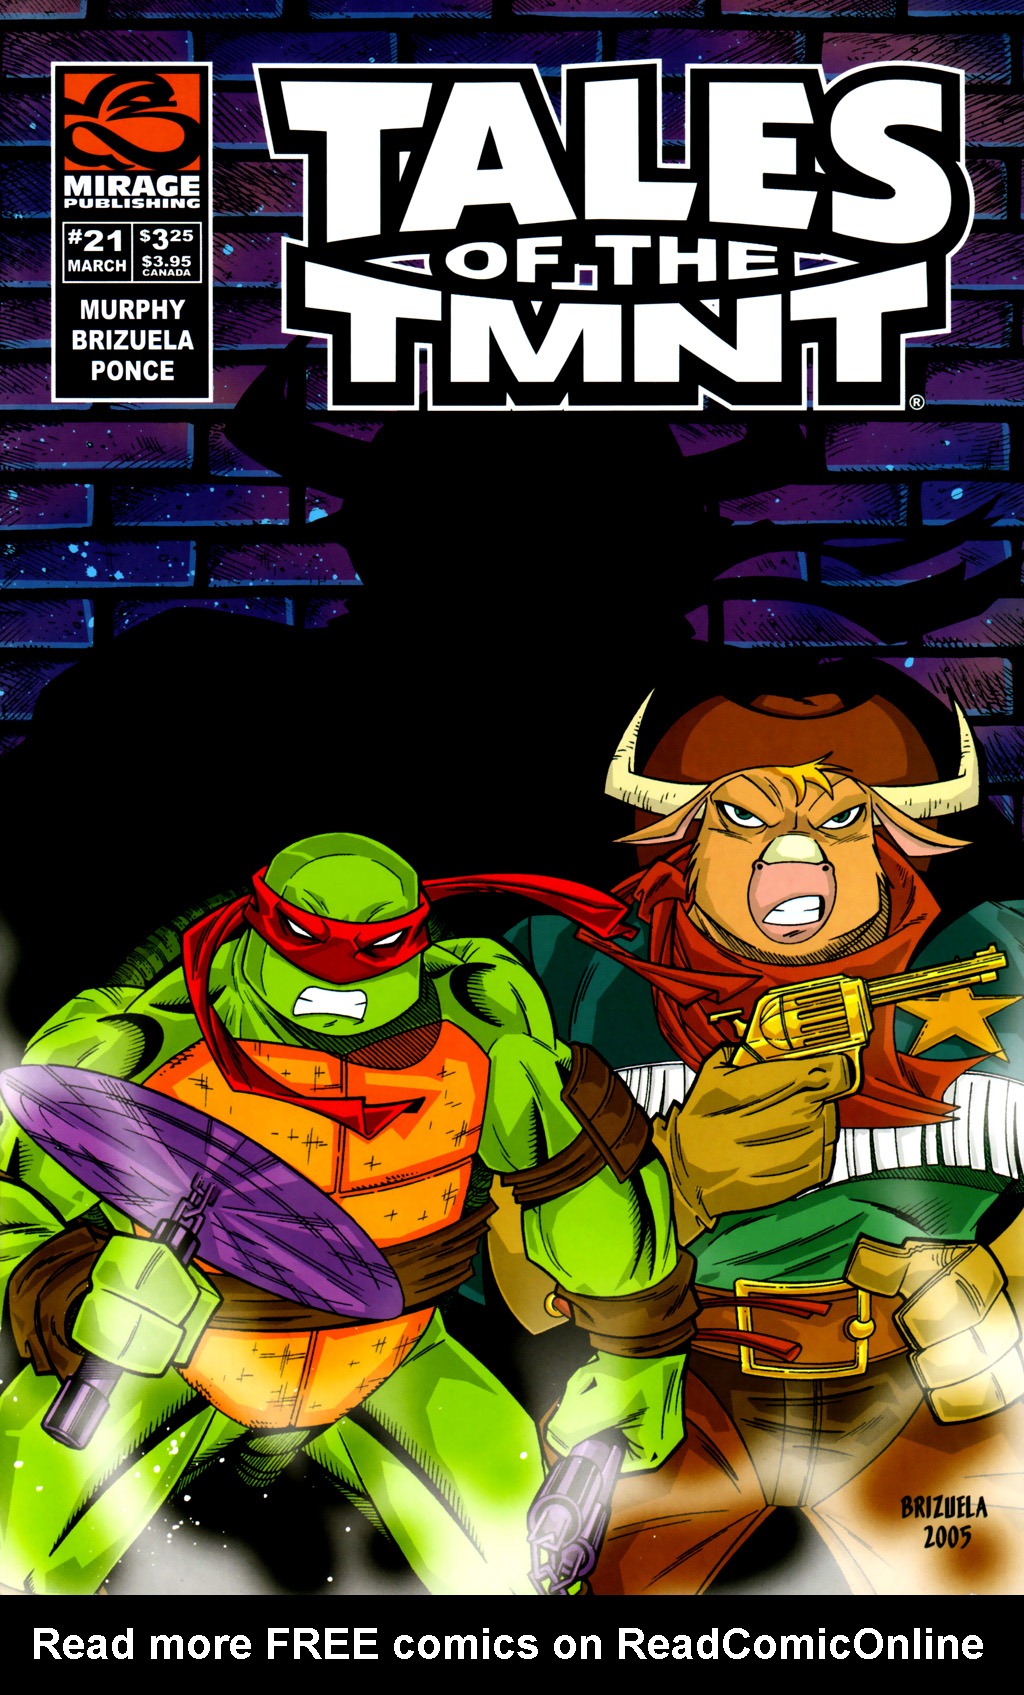 Read online Tales of the TMNT comic -  Issue #21 - 1